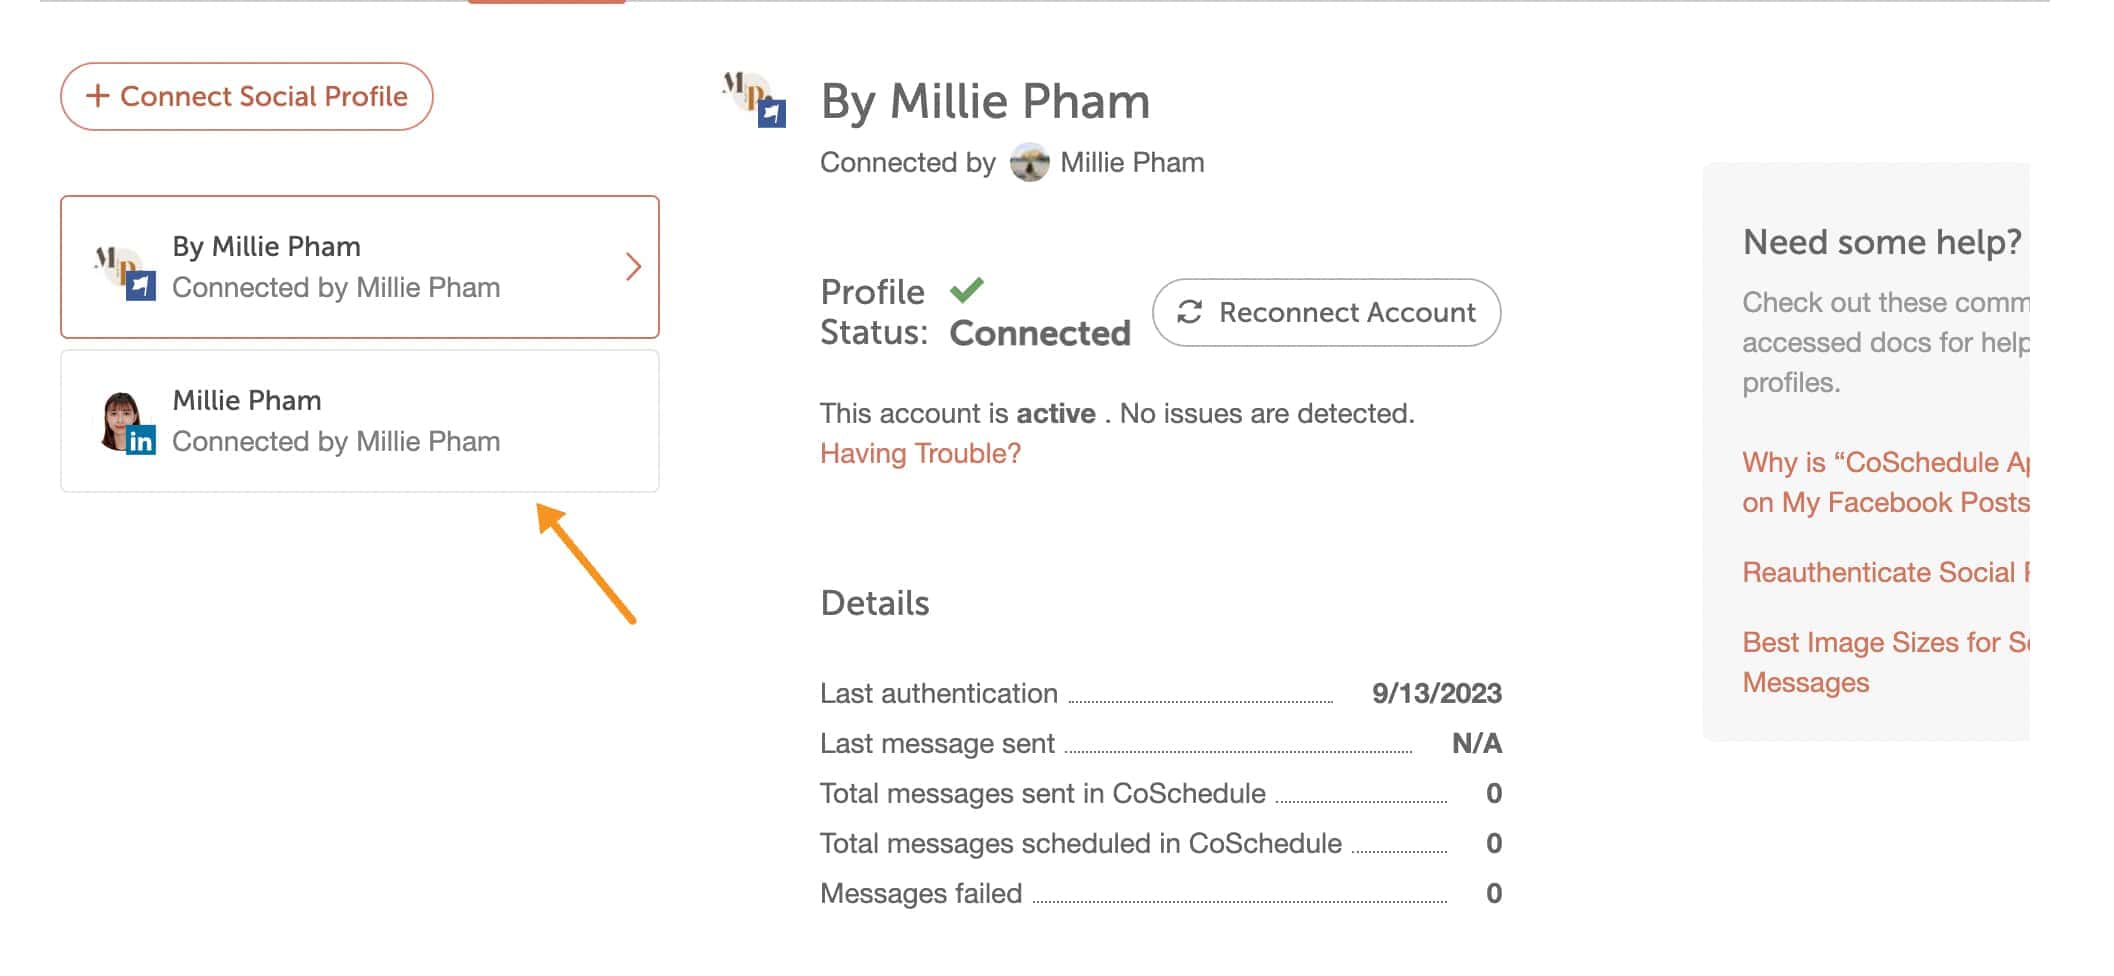 connect Millie Pham linkedin account to coschedule